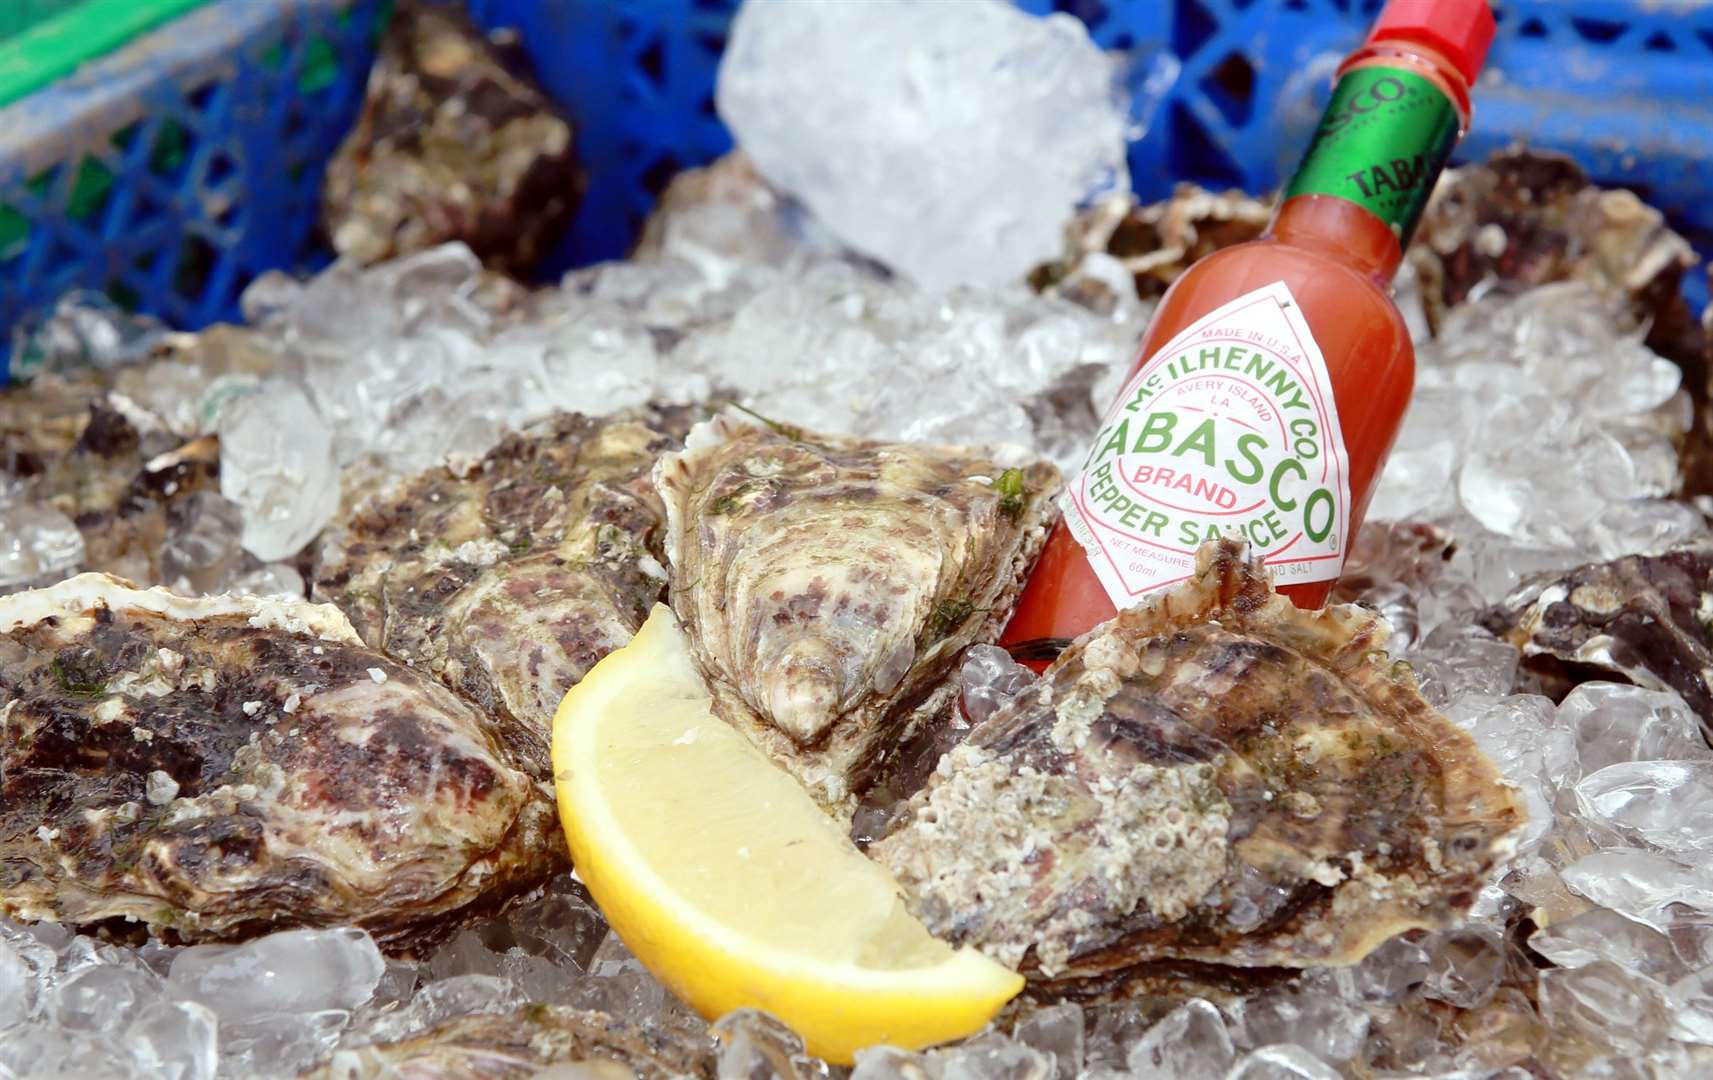 Oysters will be the delicacy of the weekend